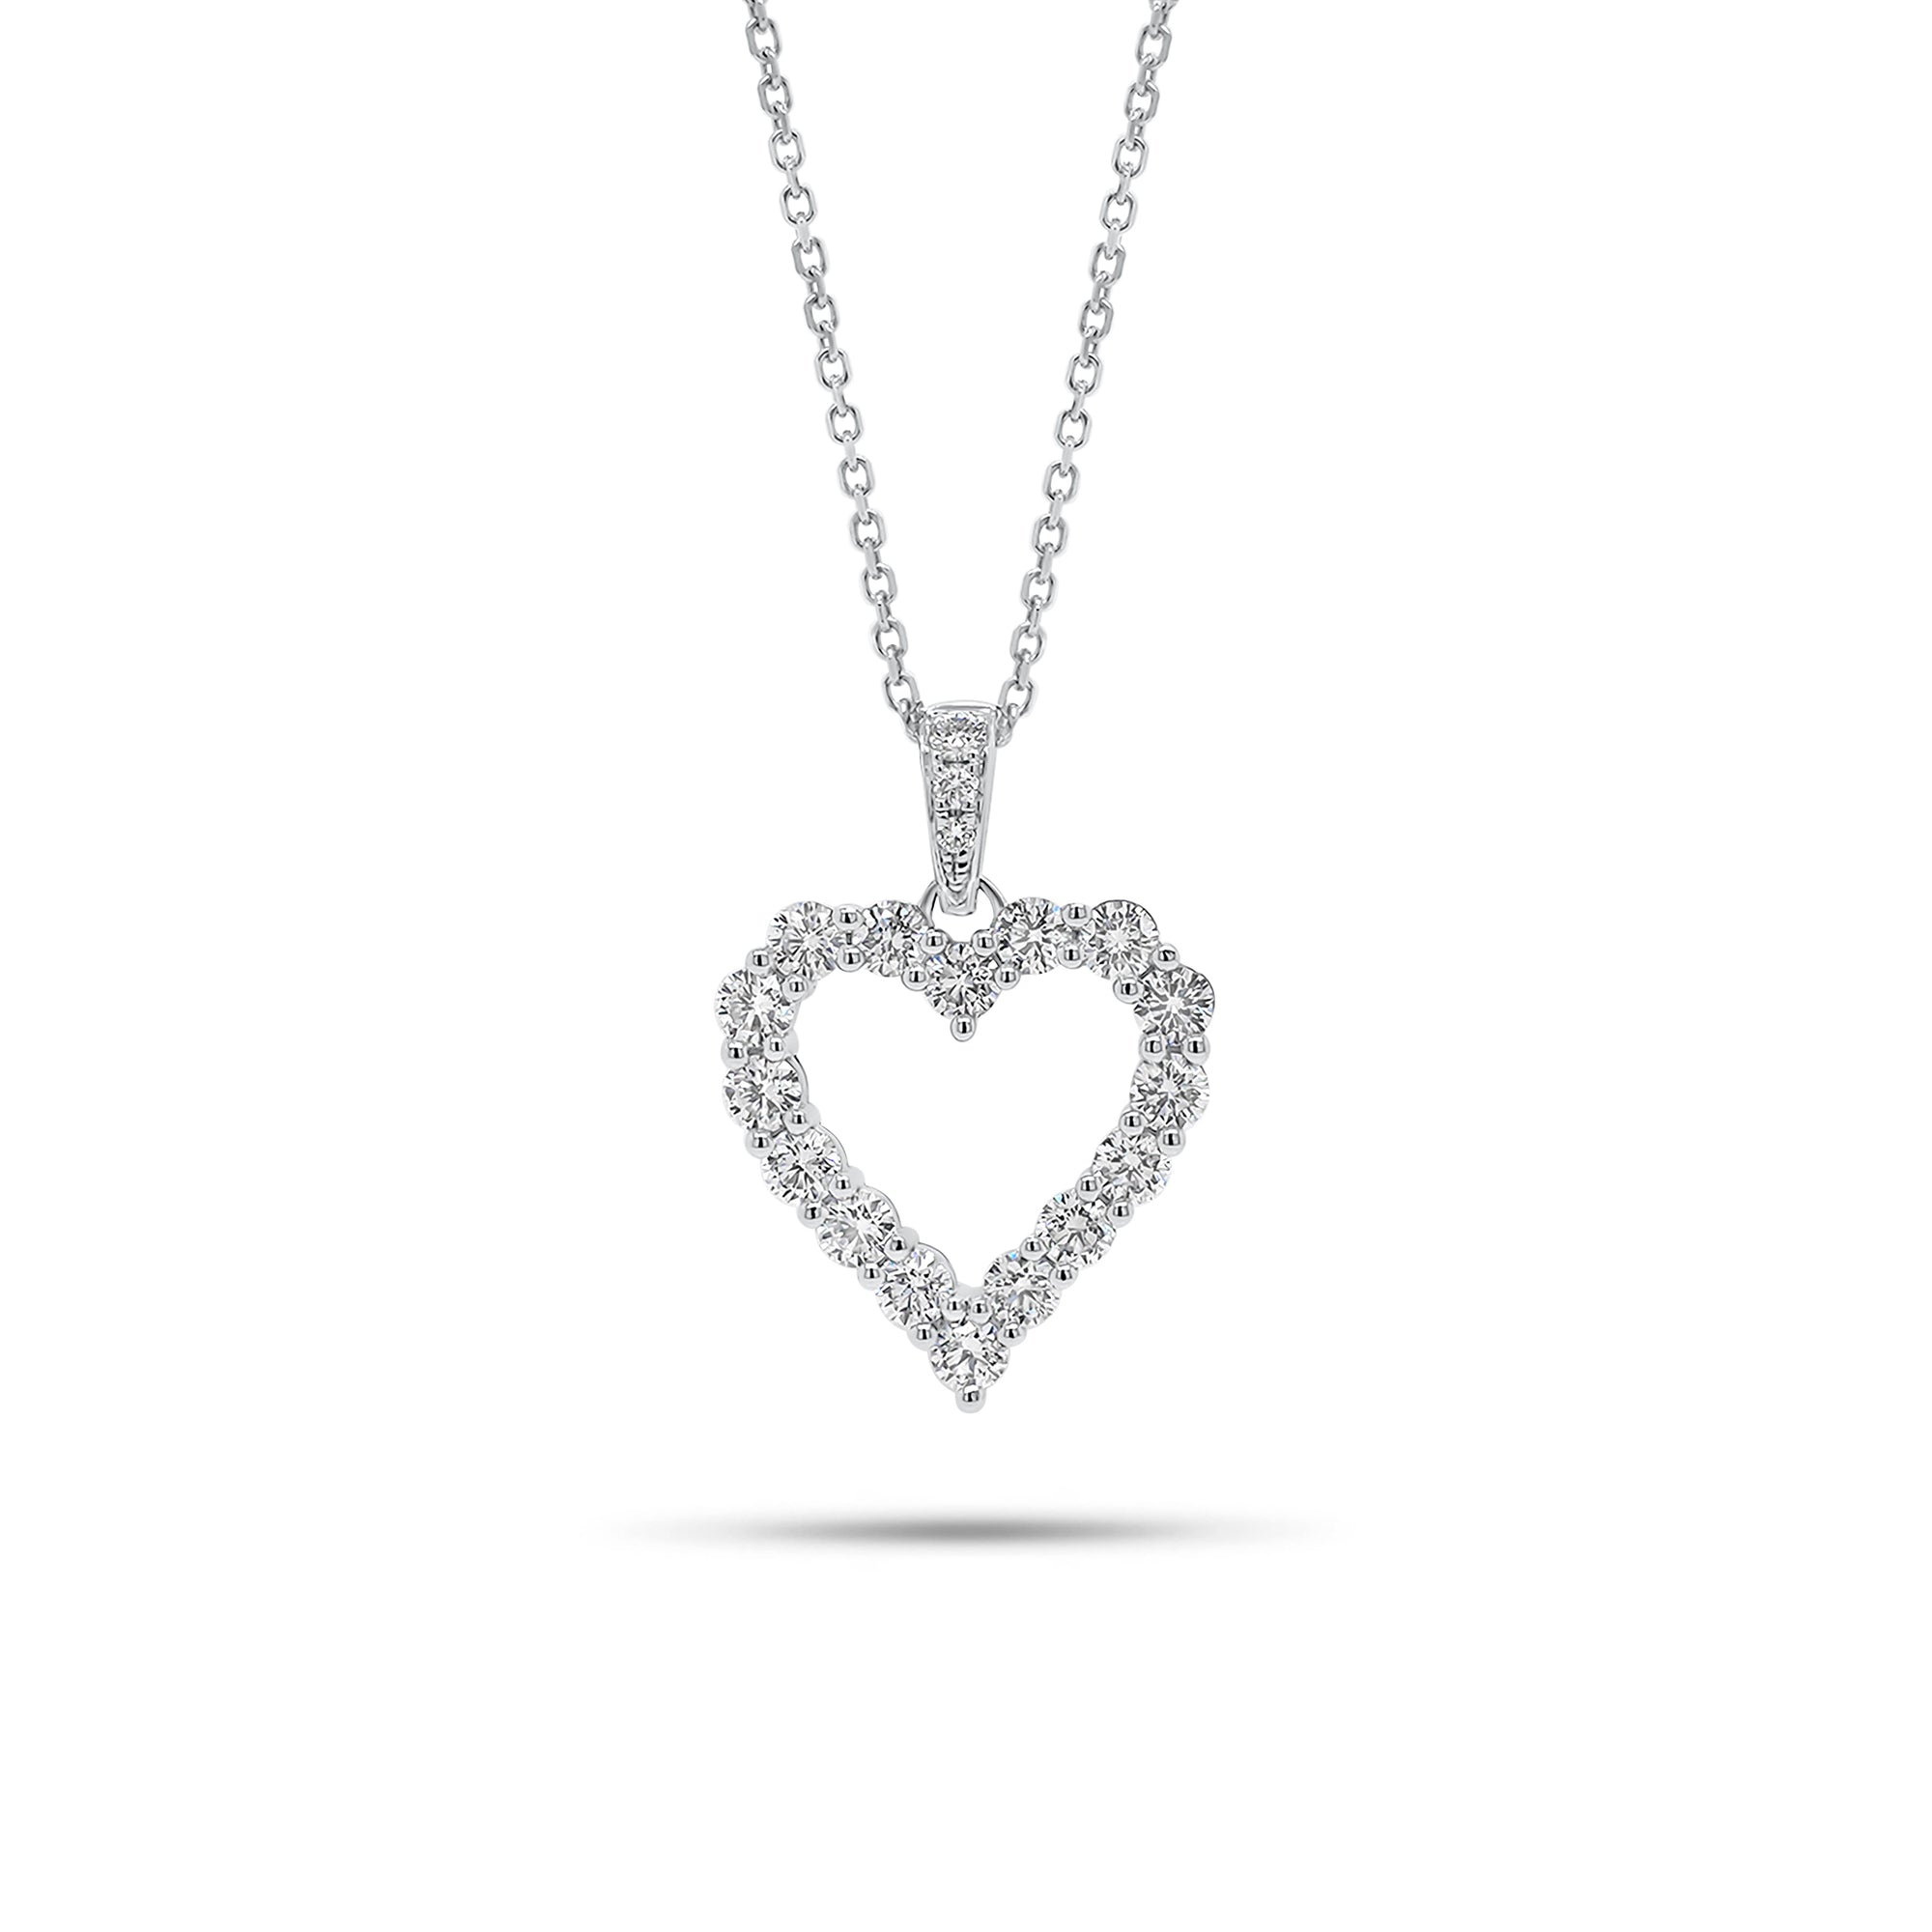 Diamond Open Heart Necklace - 18K gold weighing 2.07 grams  - 14K gold weighing 1.60 grams  - 19 round diamonds weighing 1.00 carats